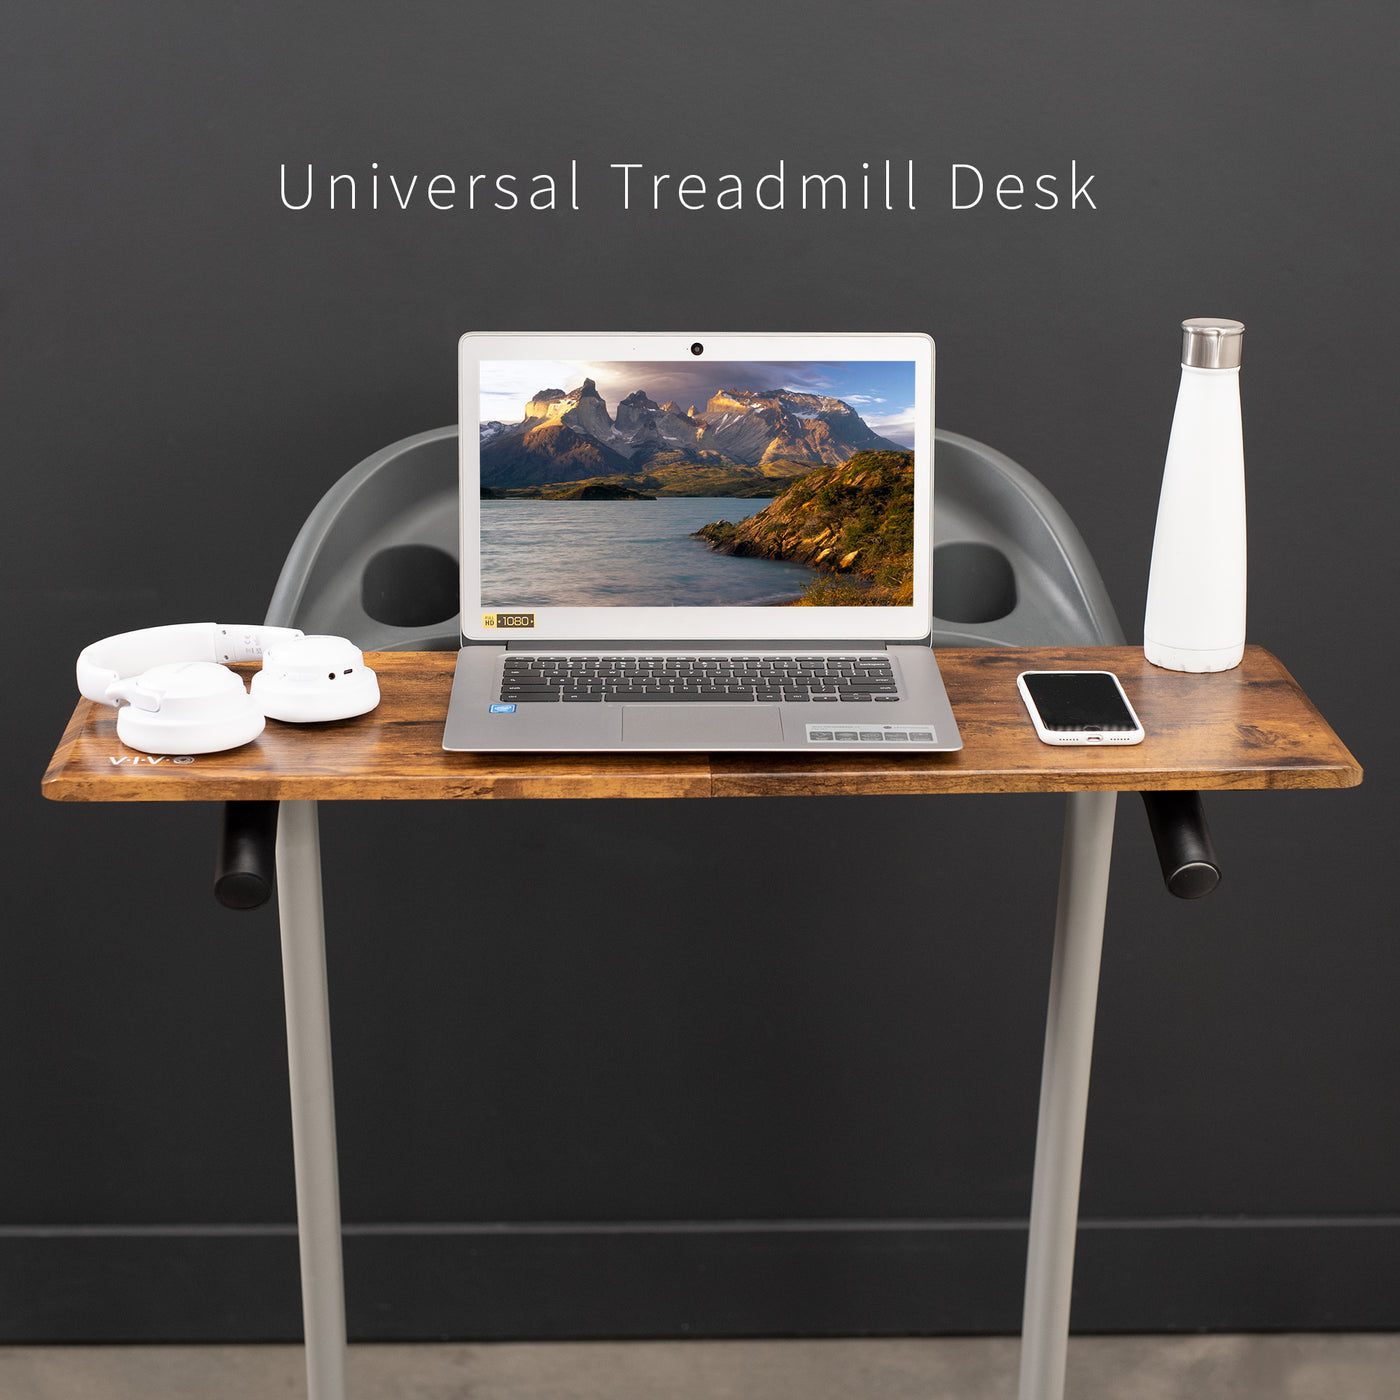 This innovative and rustic design, fitting most treadmills on the market, allows you to get your work done while walking, making it possible to study, do homework, research, shop, and more while on the move.